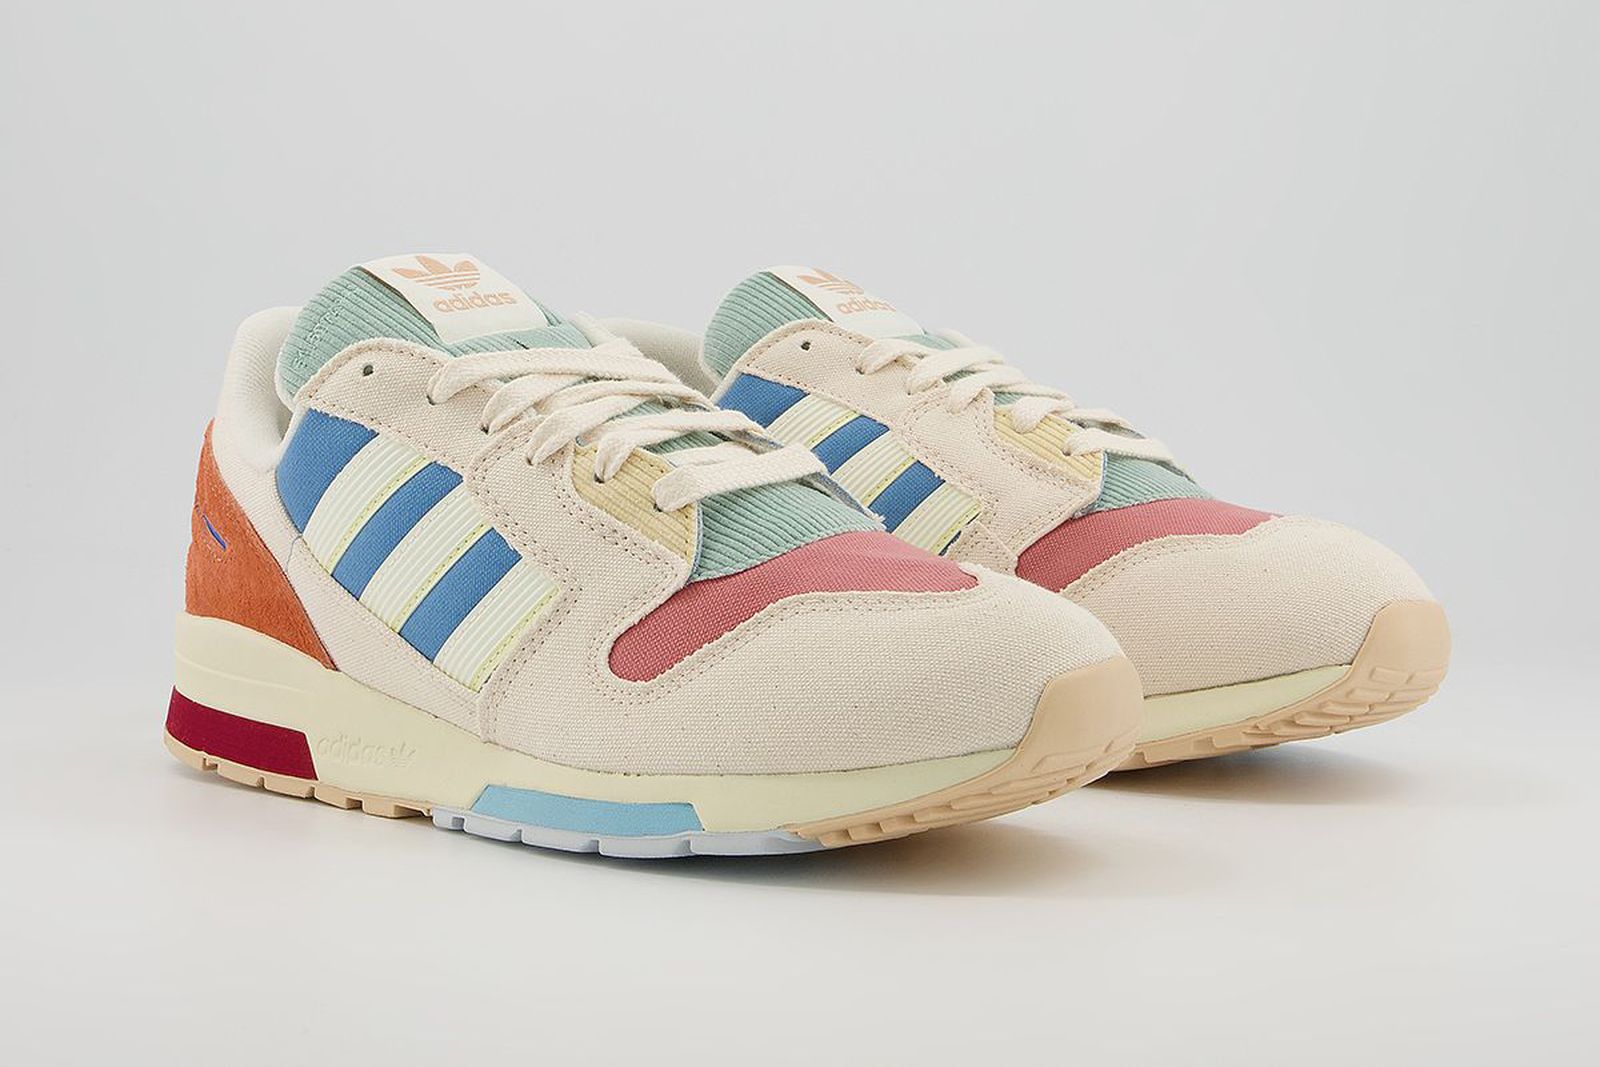 offspring-adidas-zx-420-la-release-date-price-13